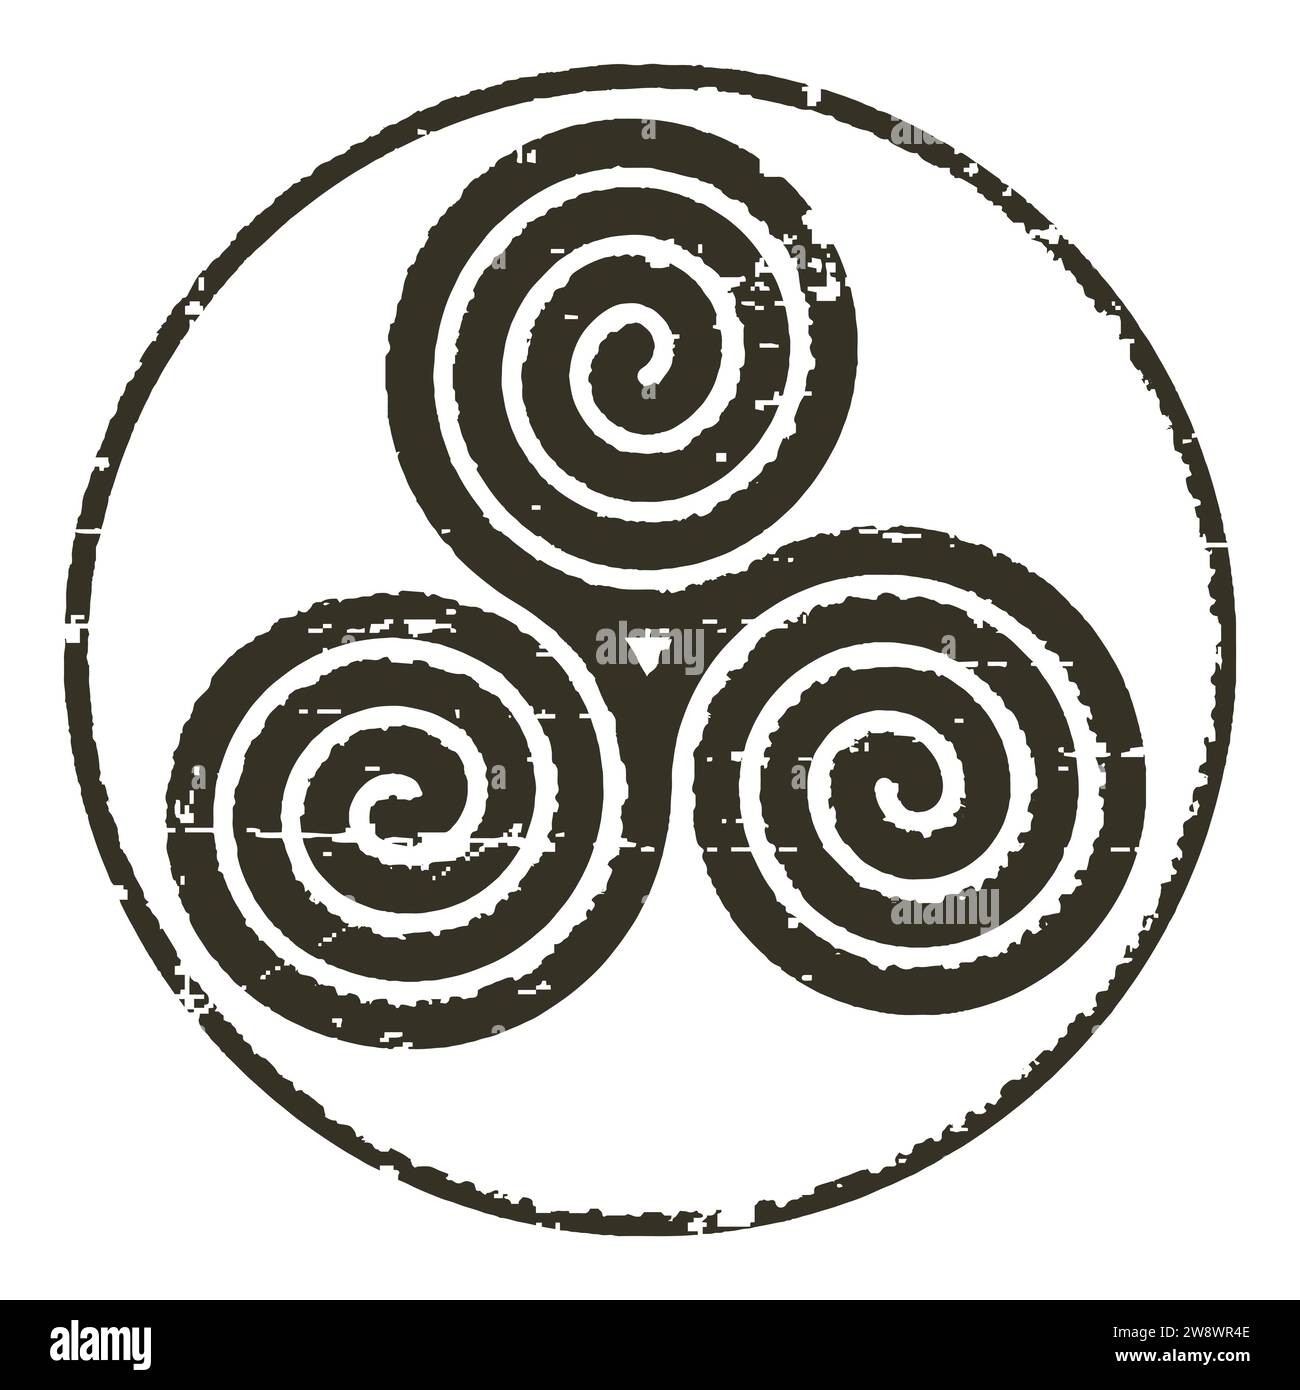 The Triskele Tattoo Meaning: Unraveling the Spirals